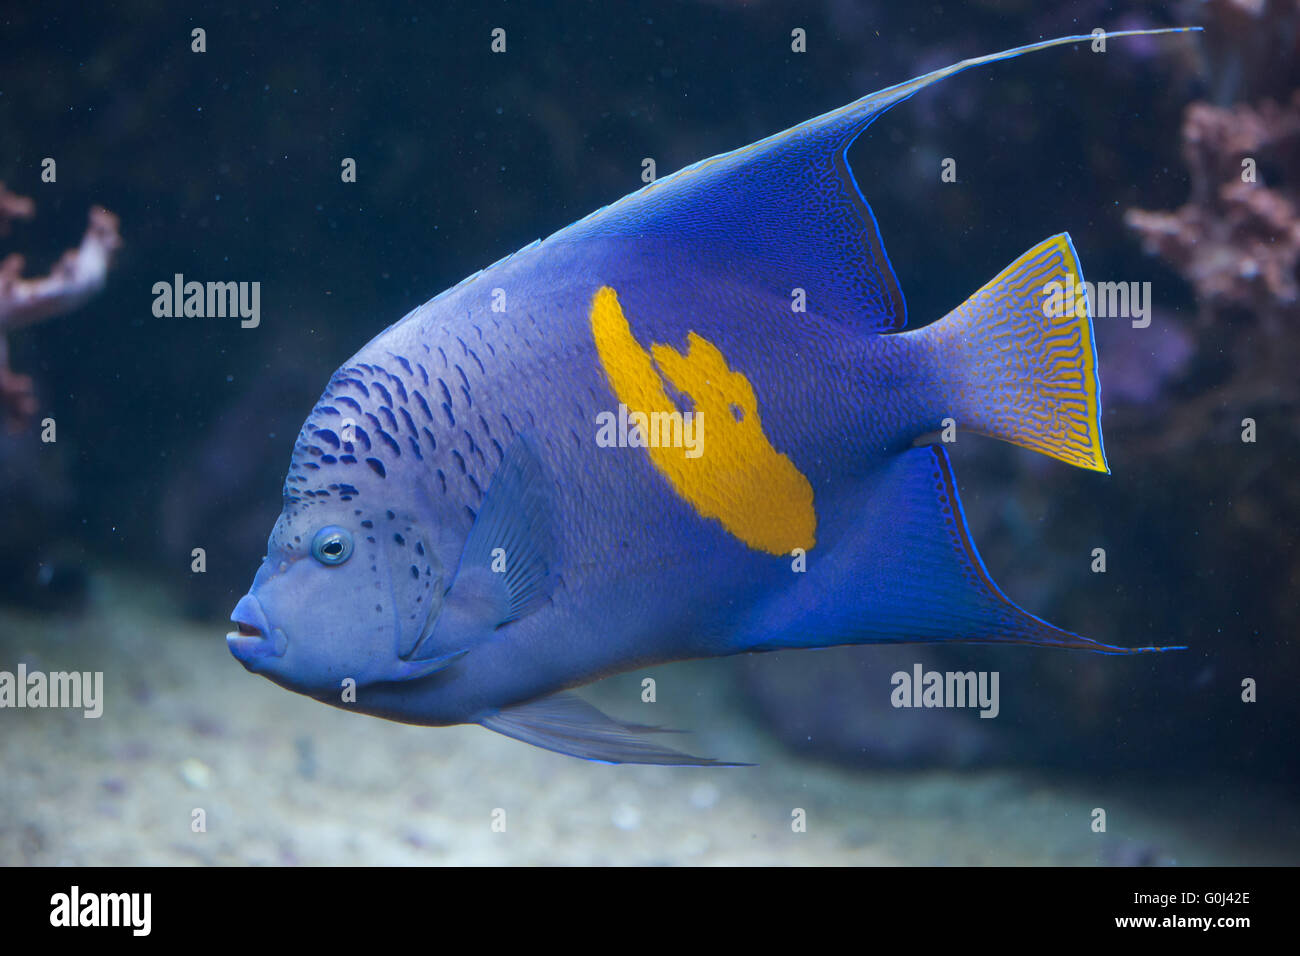 Yellowband angelfish (Pomacanthus maculosus), also known as the halfmoon angelfish at Dvur Kralove Zoo, Czech Republic. Stock Photo